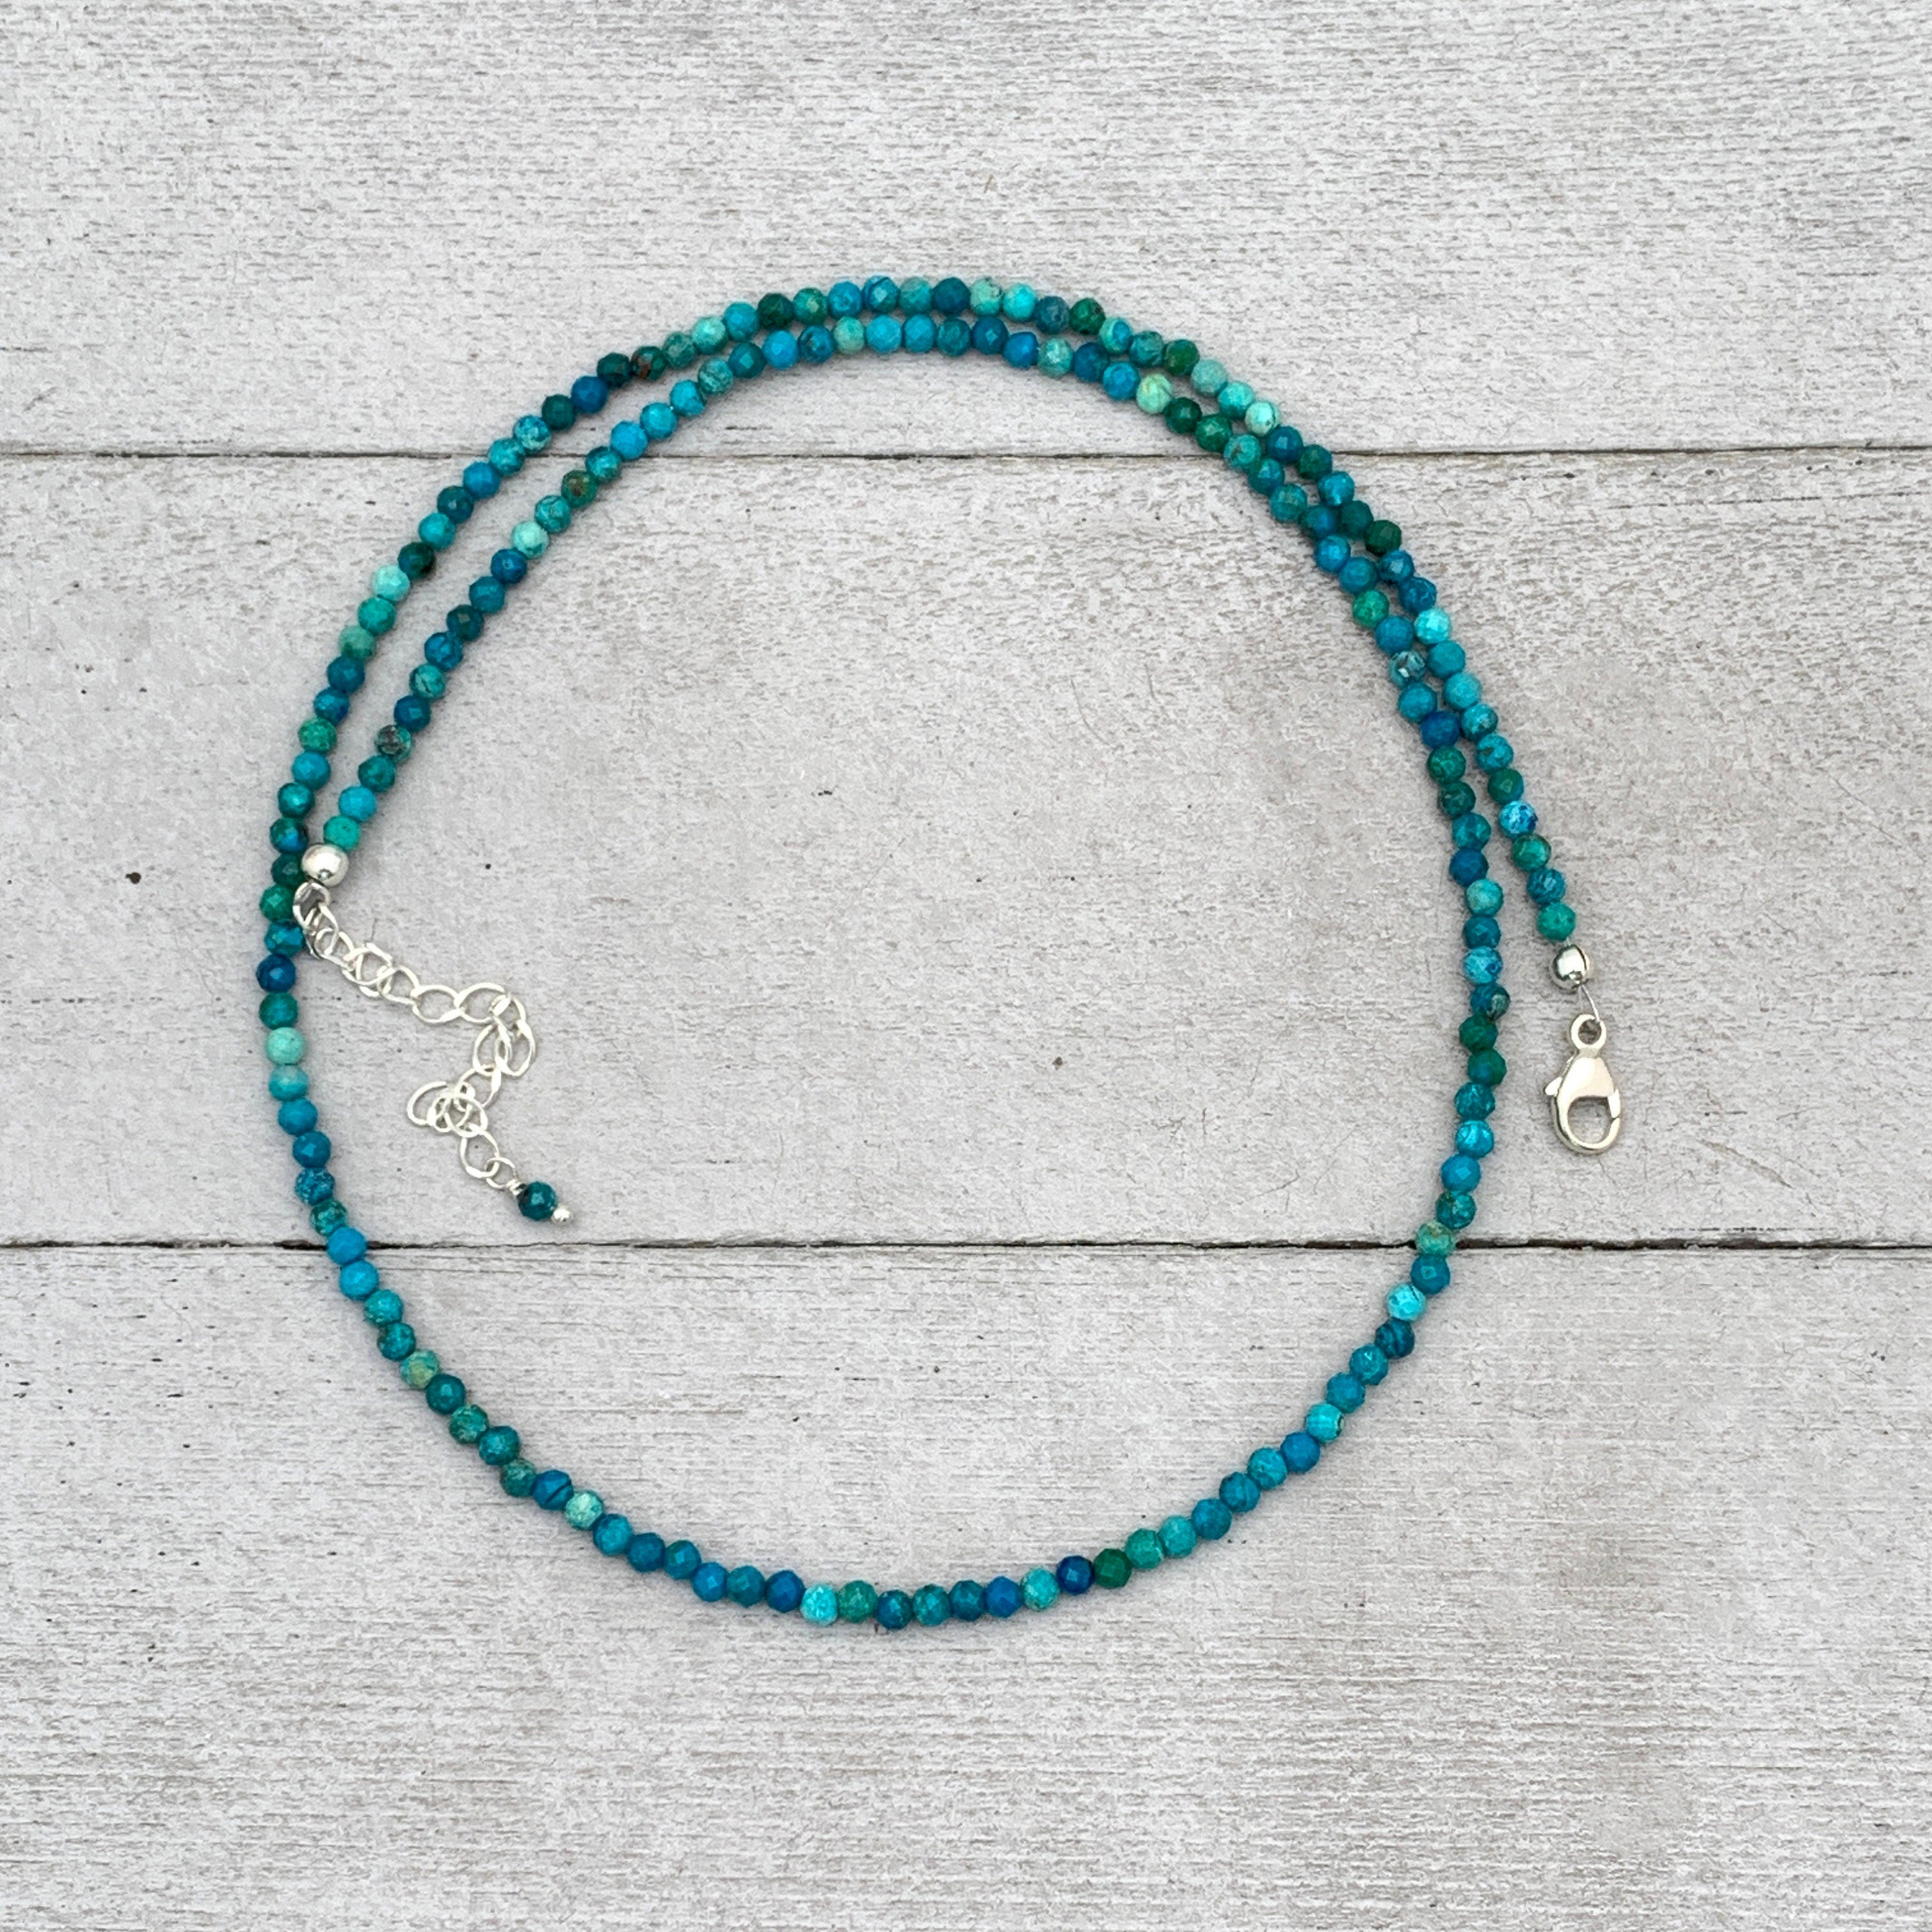 Amazon.com: Zeshimb Bohemian Beaded Choker Necklace Colorful Seed Bead  Necklace Tiny Beads Surfer Necklace Summer Beach Handmade Beaded Necklace  Jewelry for Women Girls : Clothing, Shoes & Jewelry